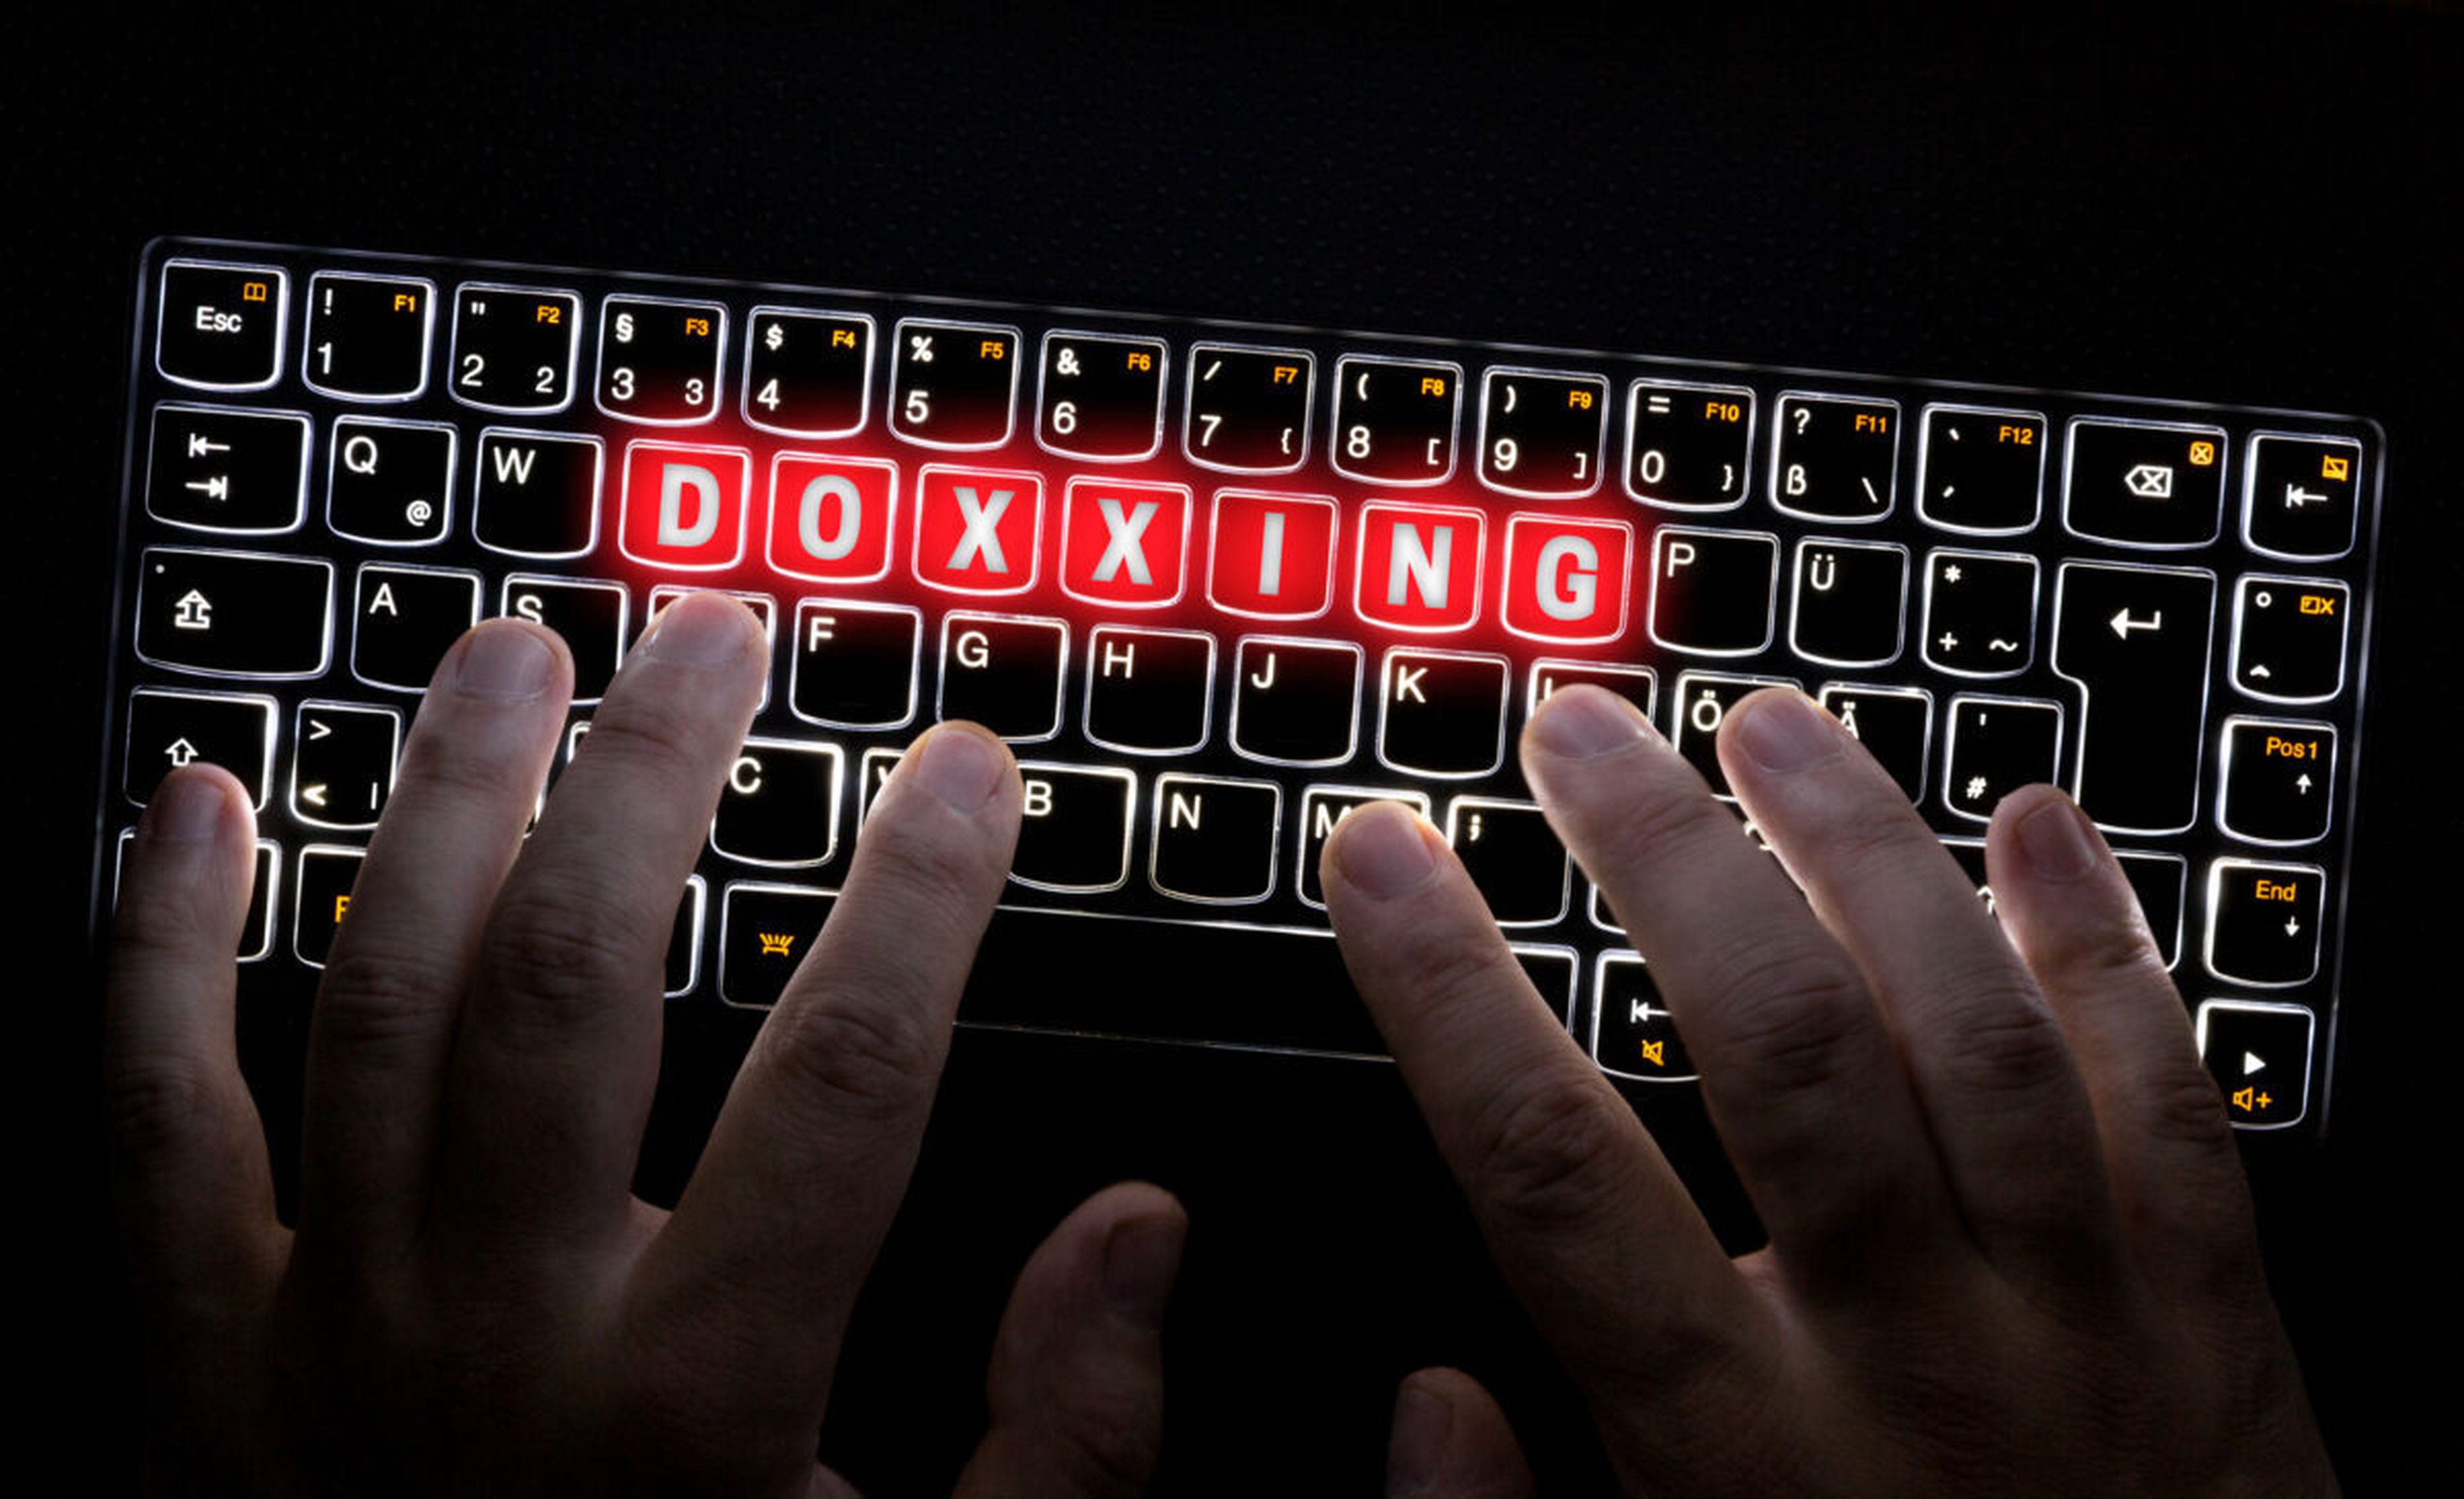 New legislation would charge the DHS Under Secretary of Intelligence, Privacy Office and Office for Civil Rights and Civil Liberties with developing and disseminating an assessment “regarding the use of cyber harassment, including doxing, by terrorists and foreign malicious actors.” (Image Credit: 8vFanI via Getty Images)